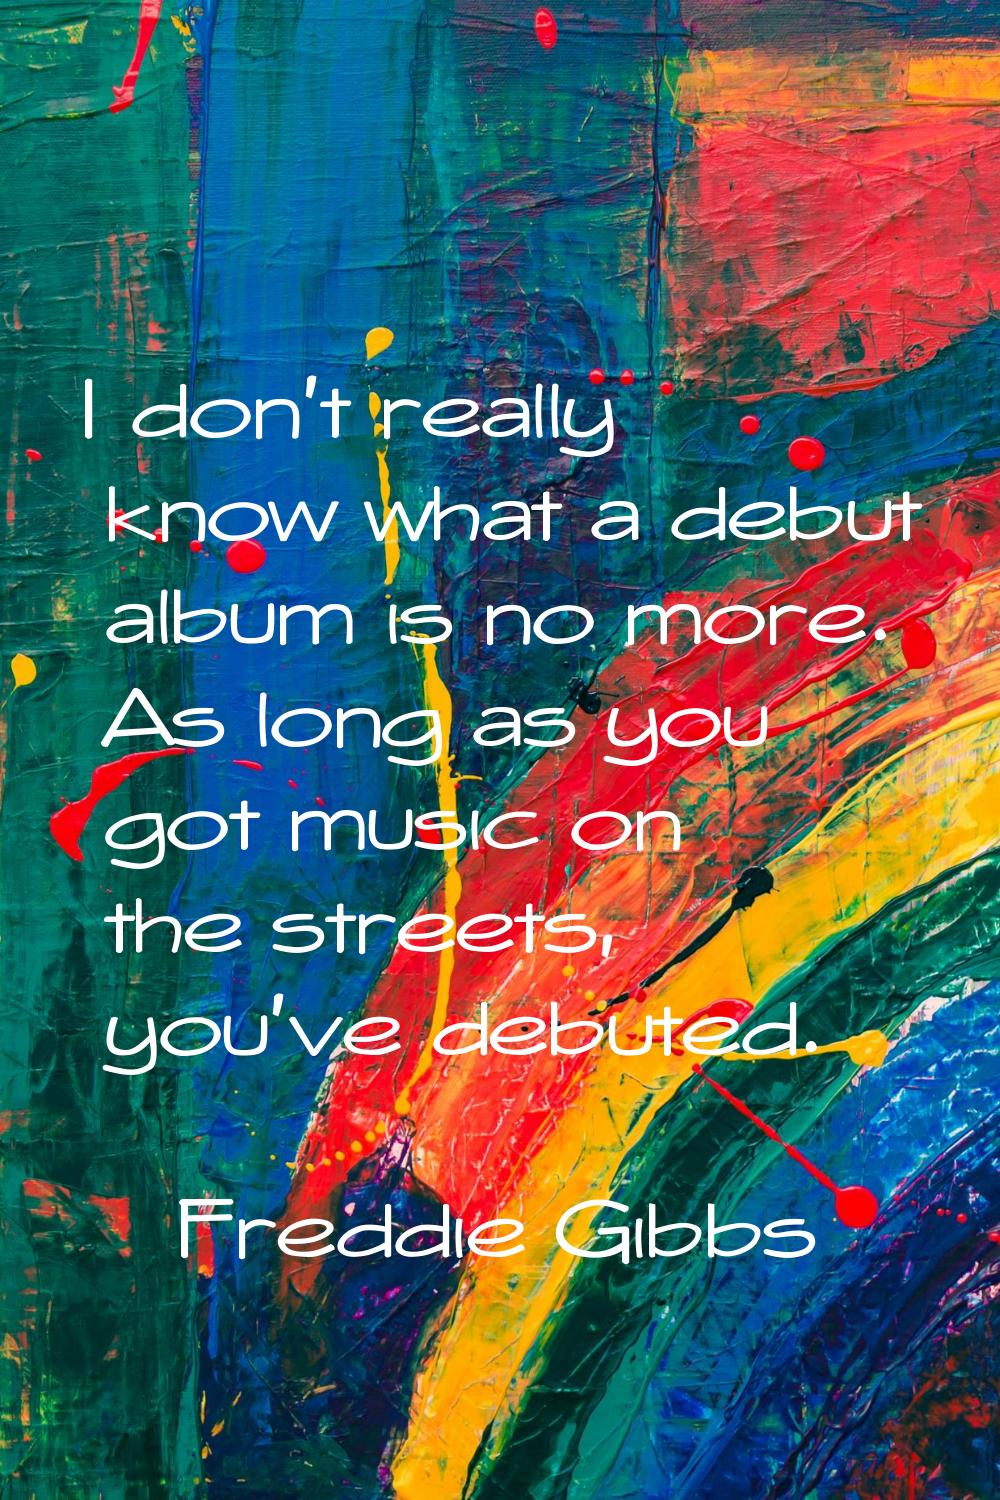 I don't really know what a debut album is no more. As long as you got music on the streets, you've 